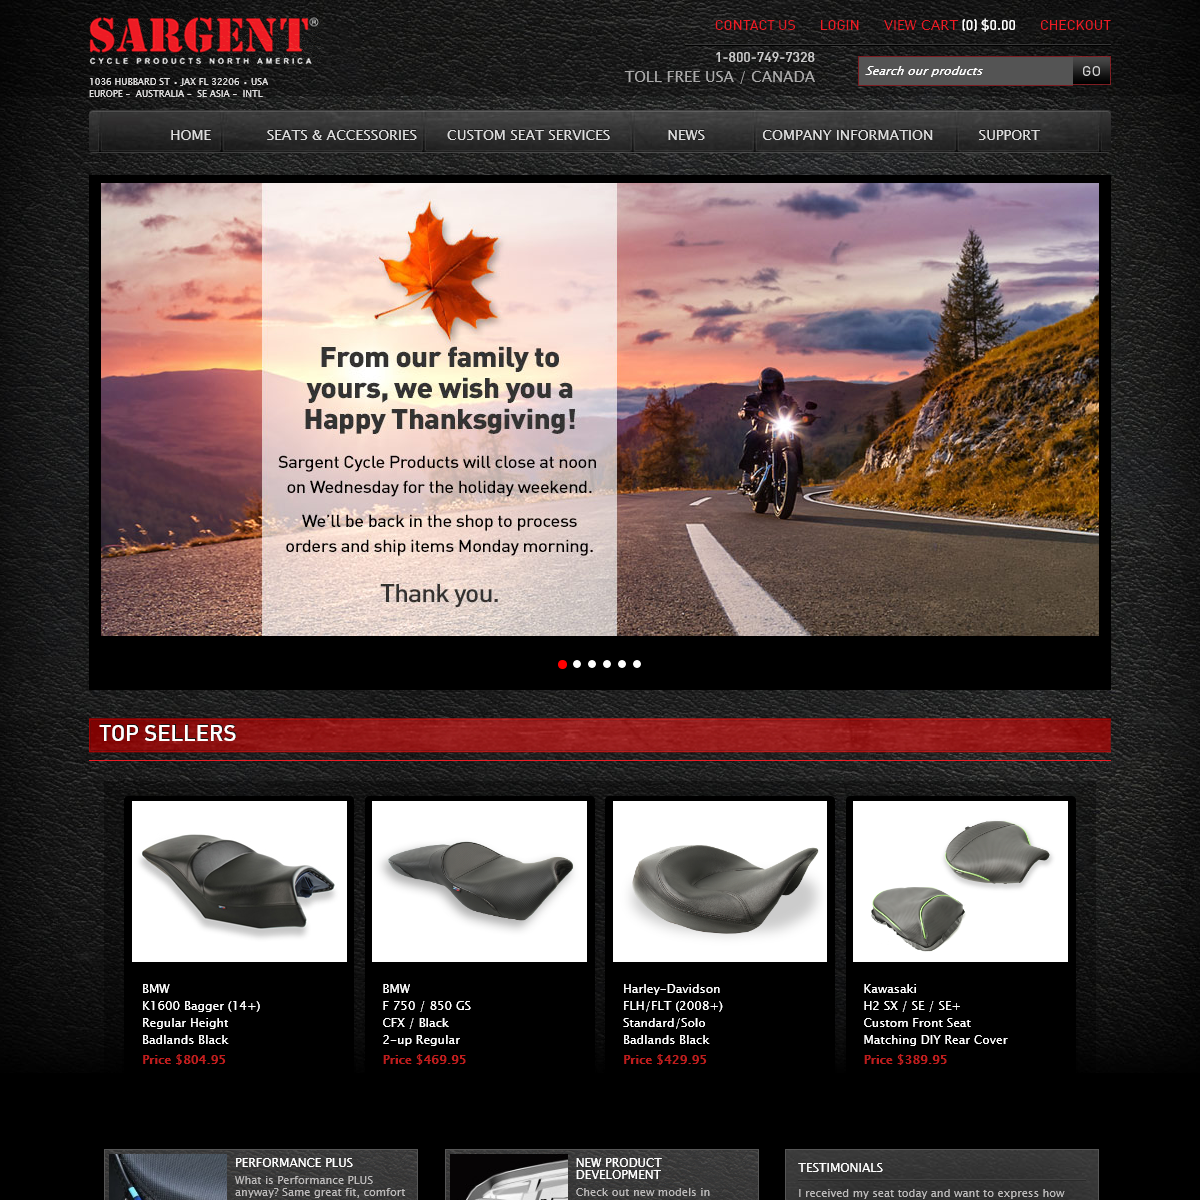 A complete backup of sargentcycle.com